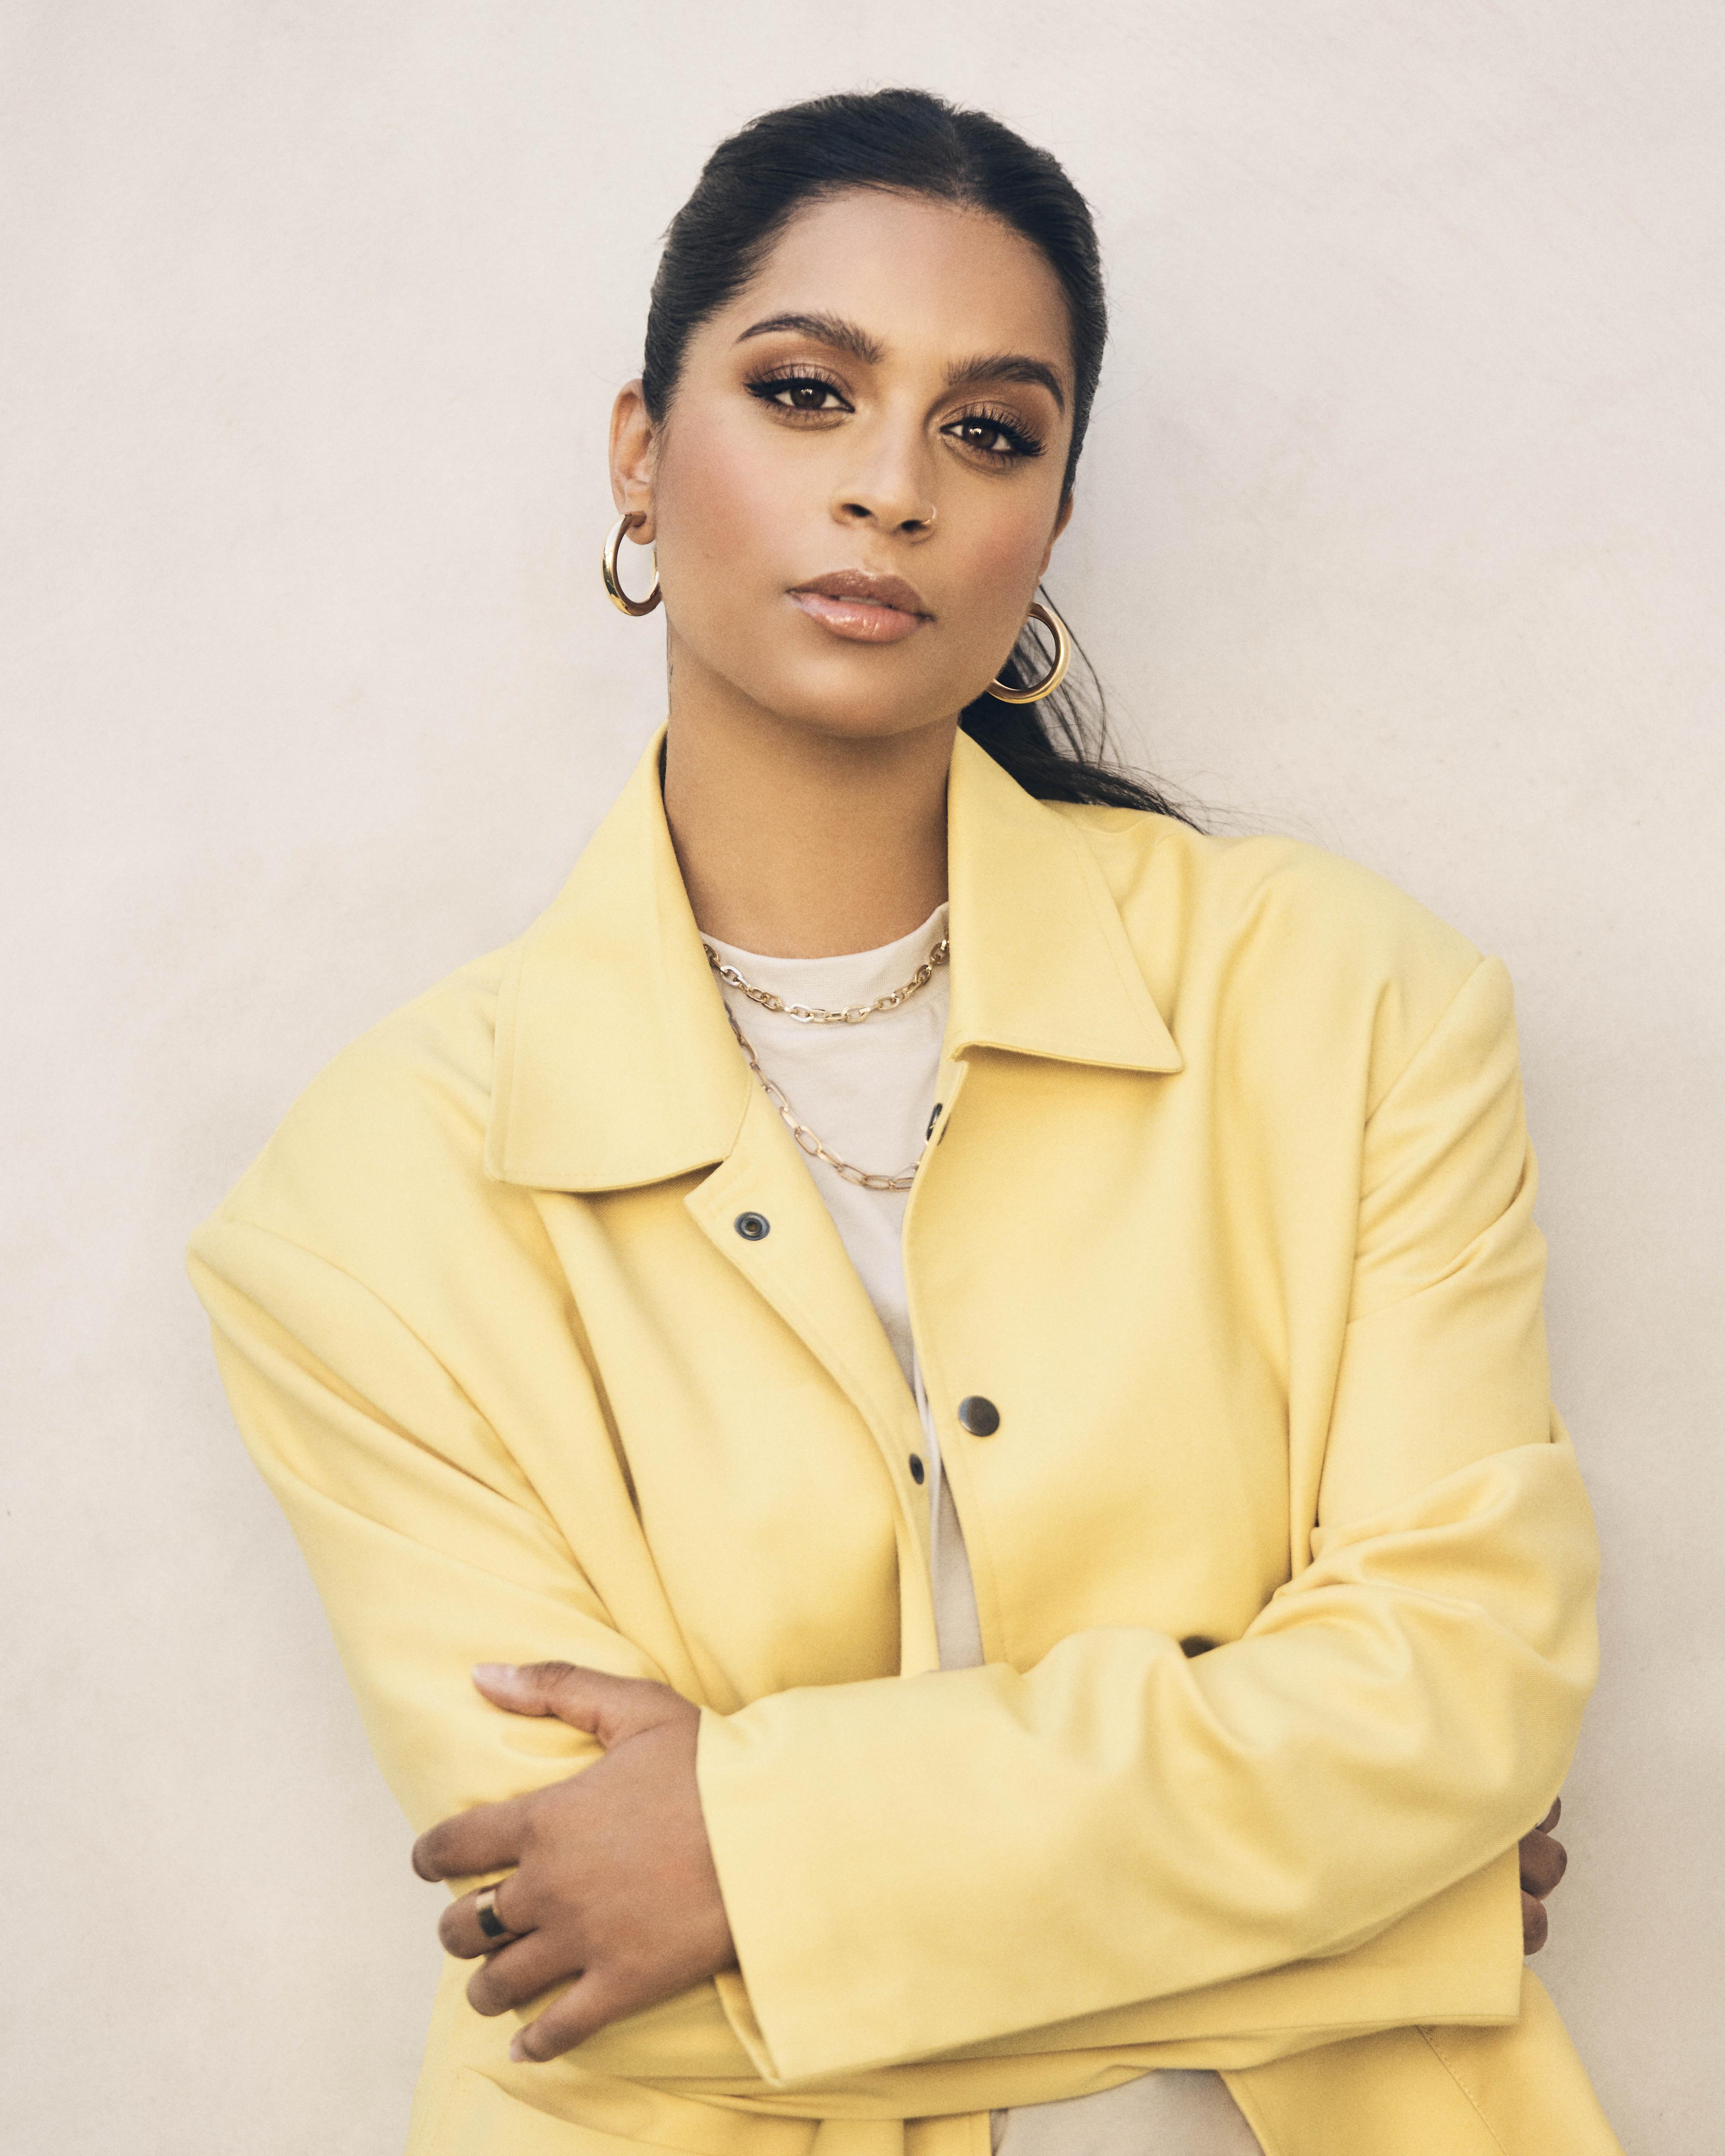 Lilly Singh image